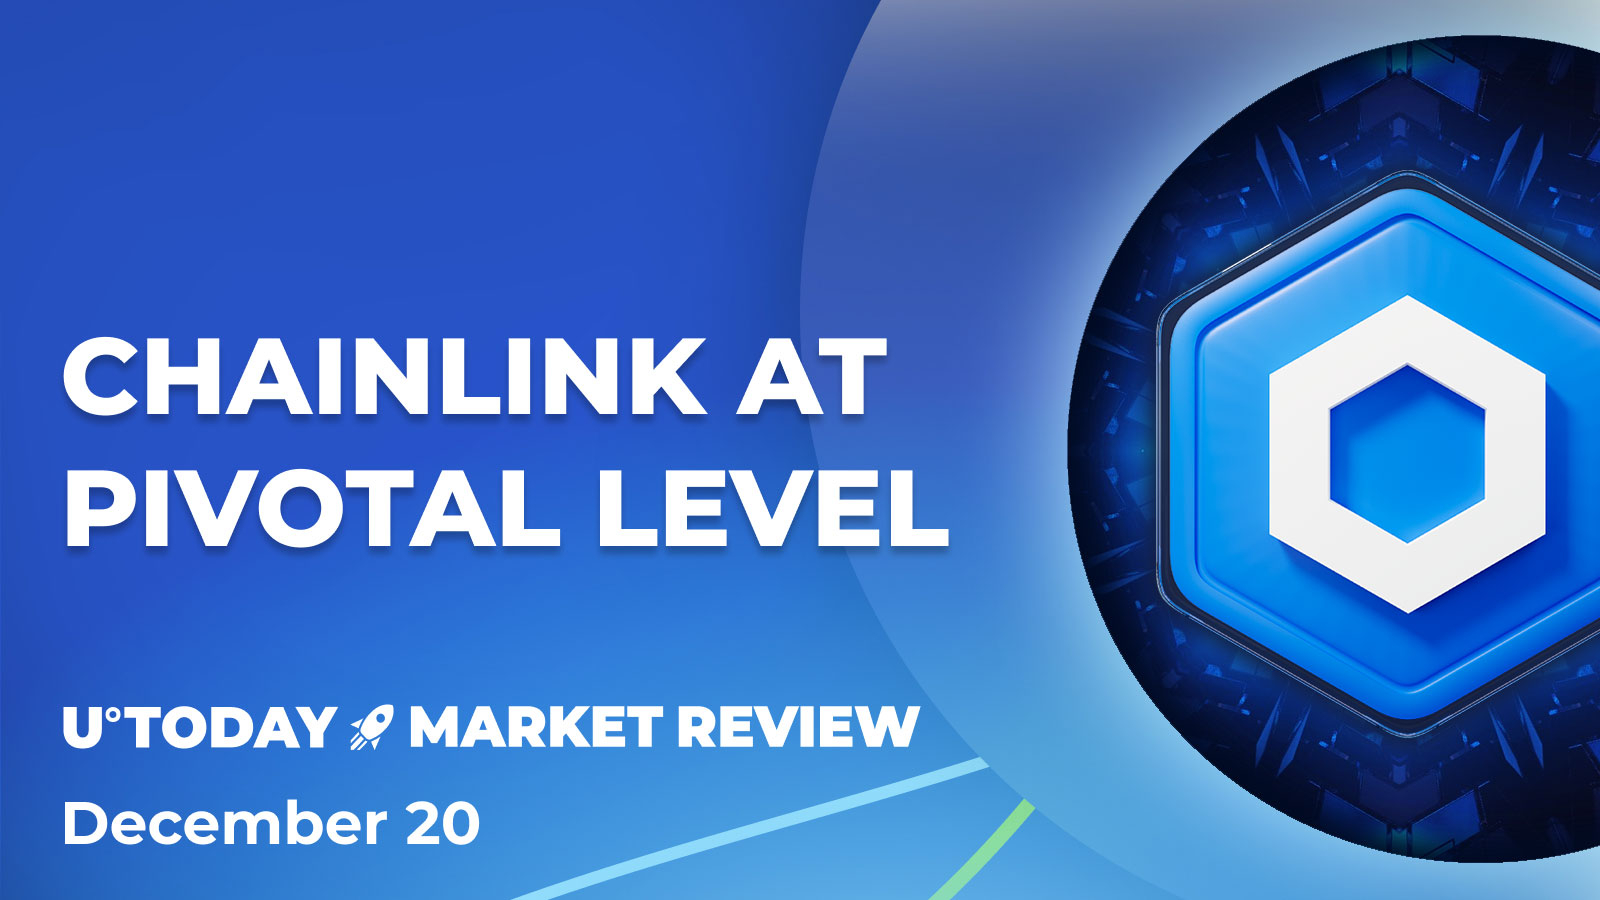 Chainlink (LINK) on Reversal Point, Aims for 20% Rally